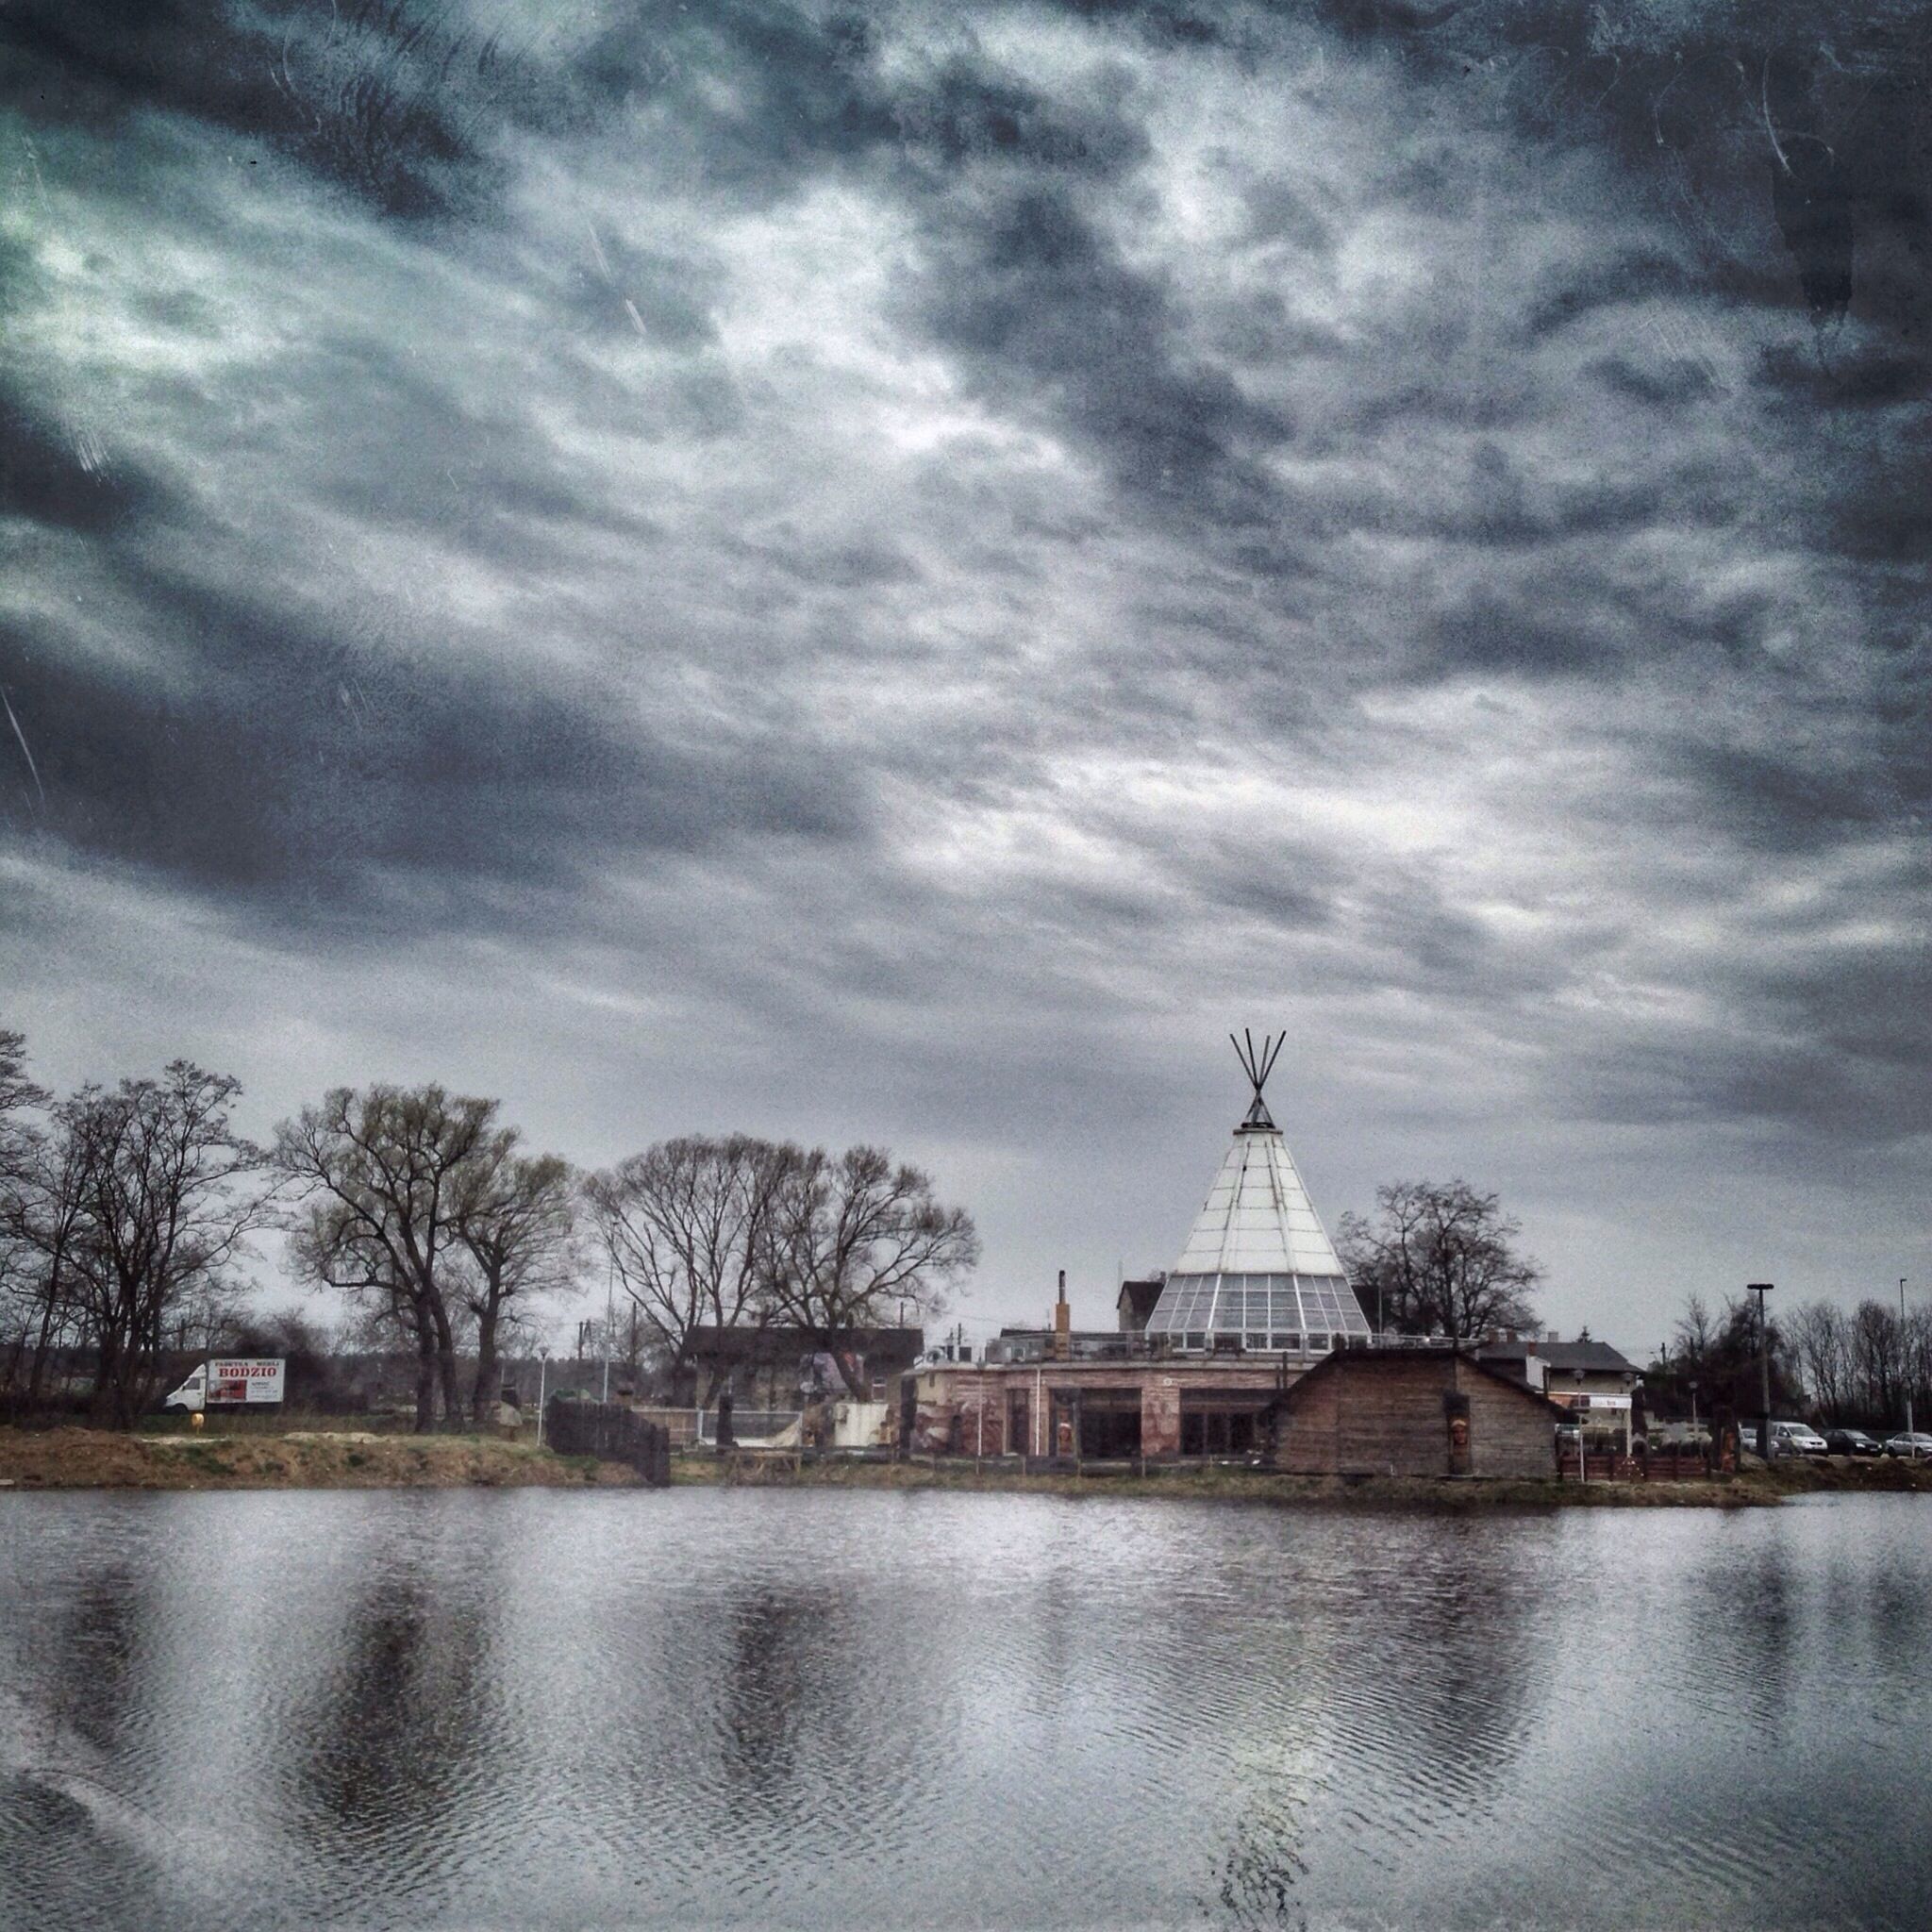 architecture, built structure, building exterior, sky, cloud - sky, water, cloudy, waterfront, religion, place of worship, spirituality, church, tree, cloud, reflection, weather, lake, overcast